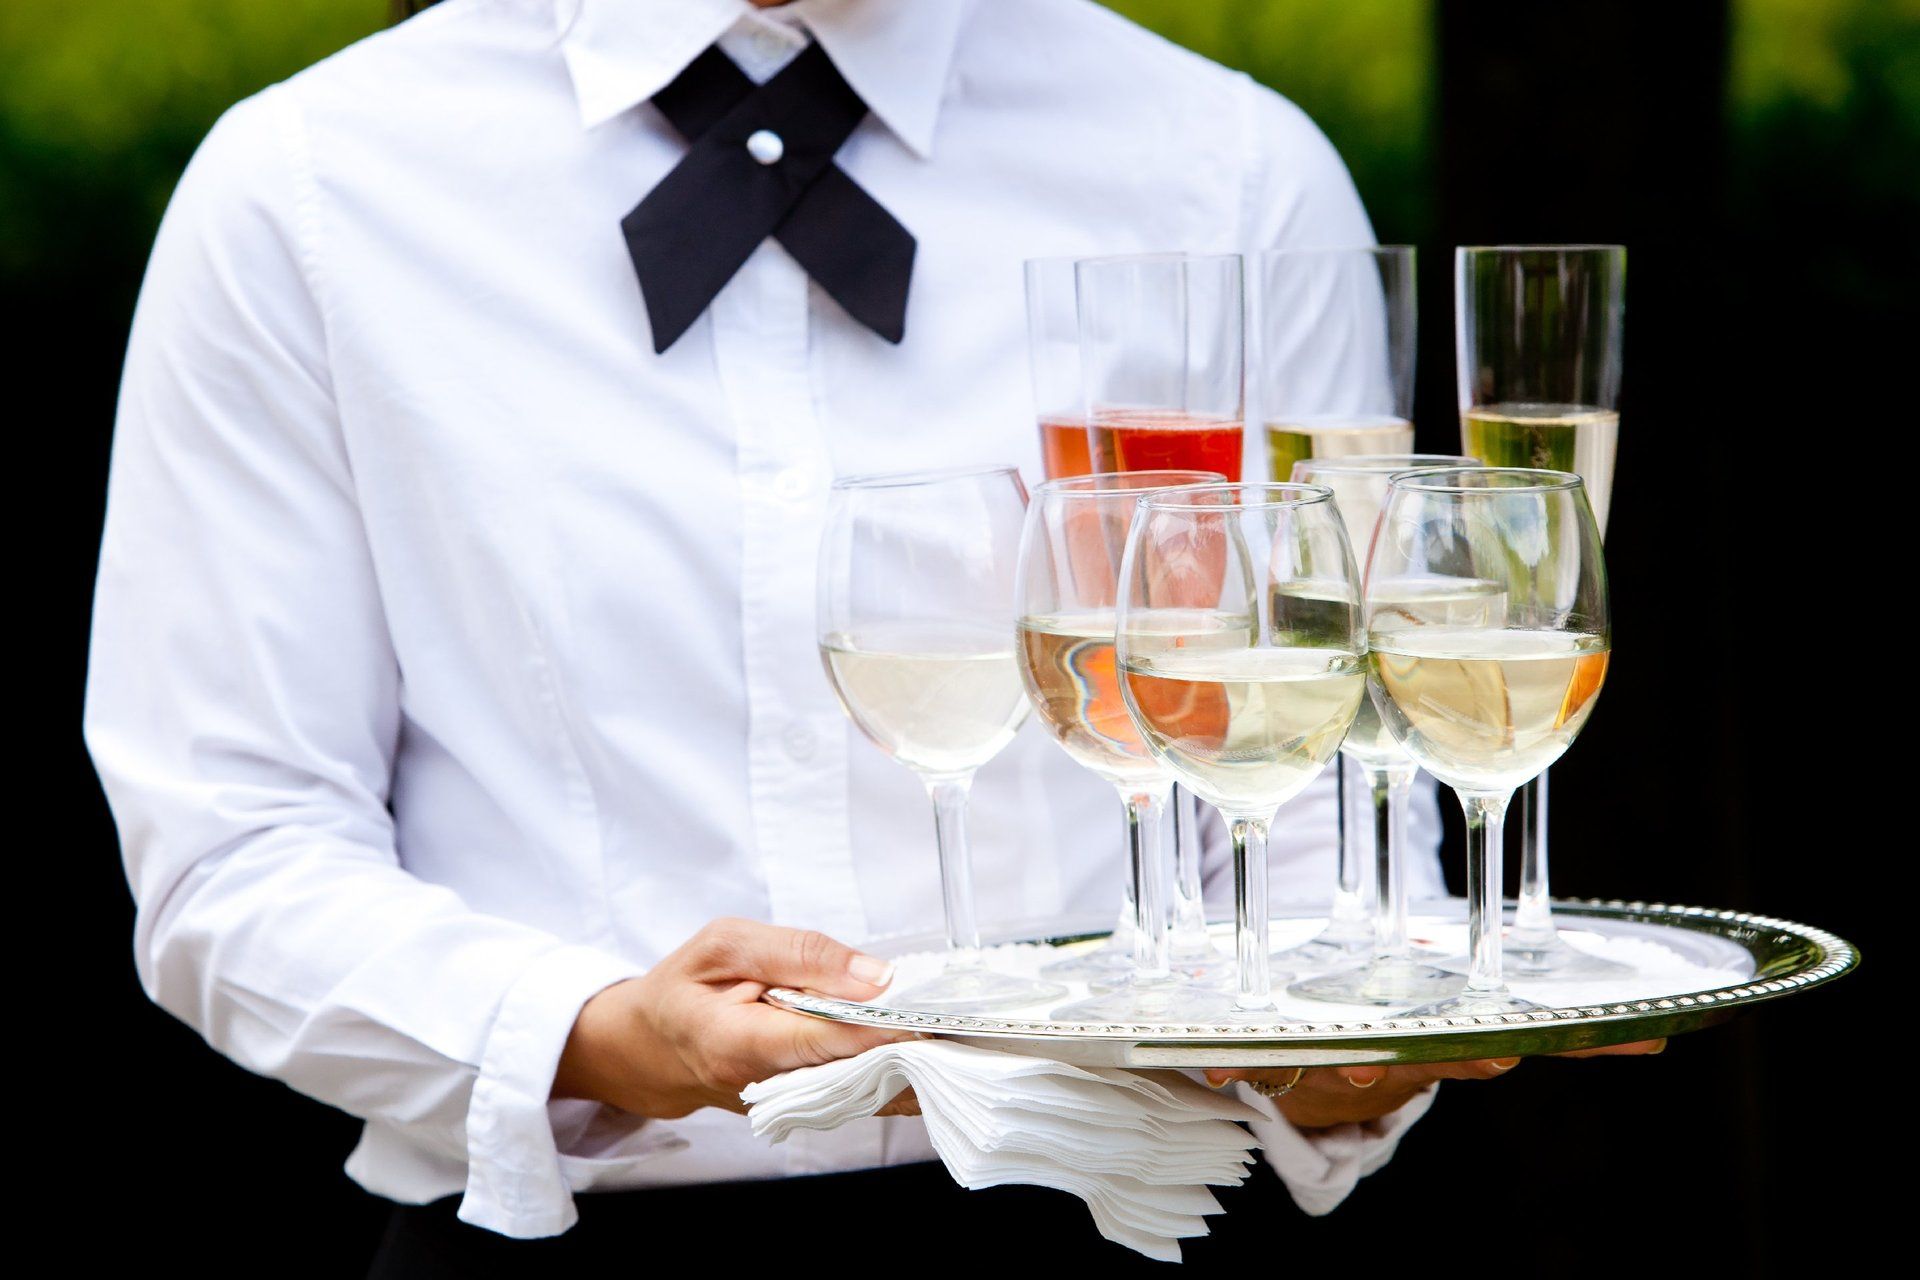 drinks being served by a waiter